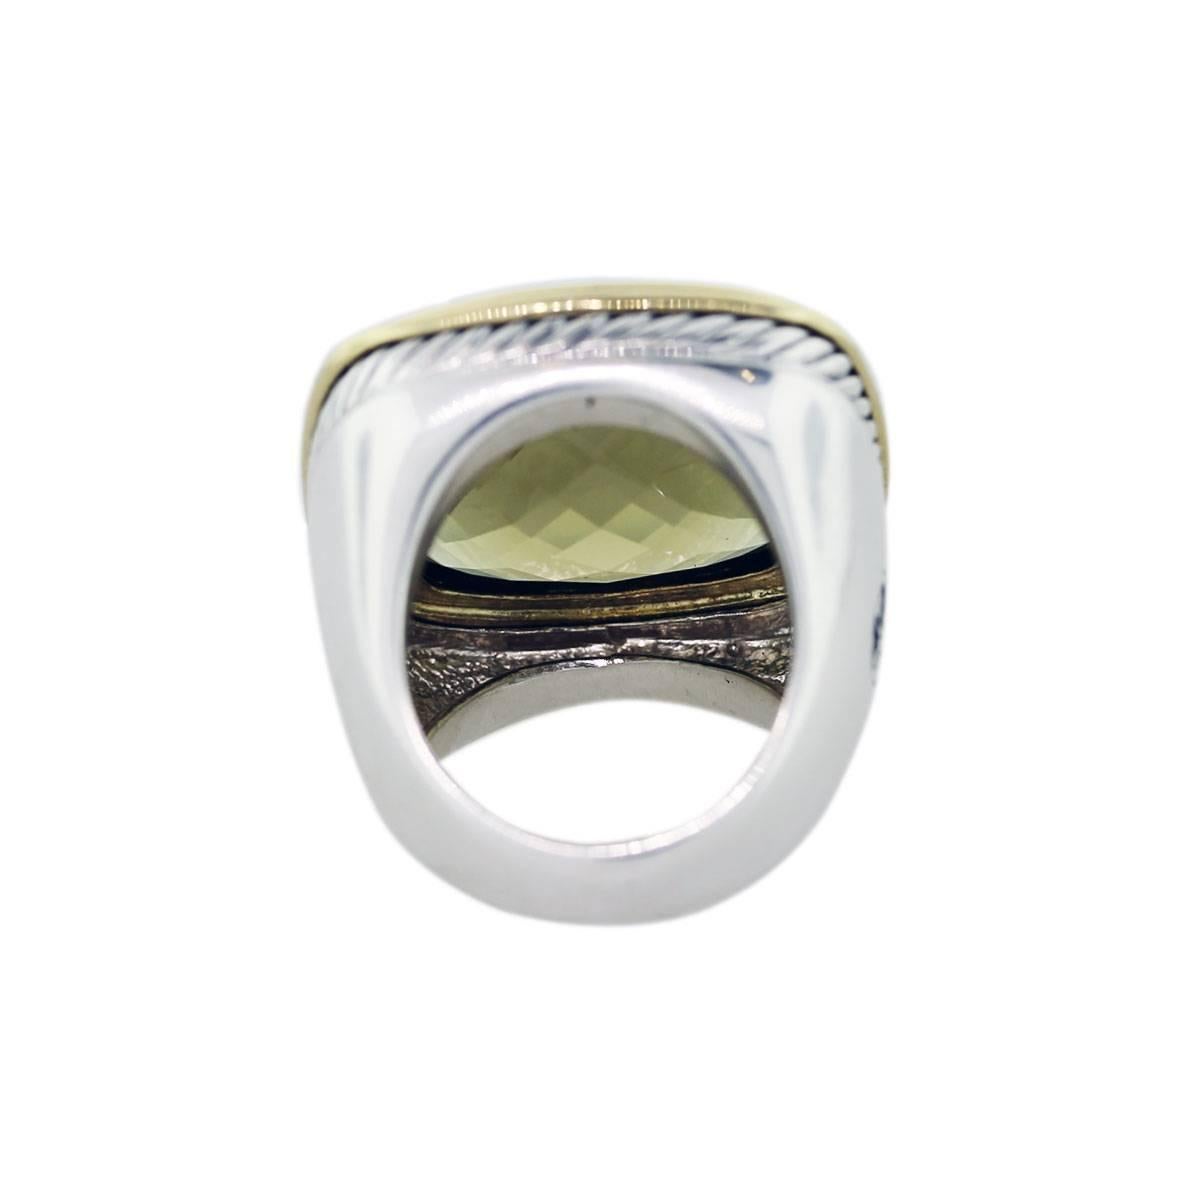 Designer: David Yurman
Style: David Yurman 20 mm Albion Lemon Quartz Ring
Material: Sterling Silver and 18K Yellow Gold
Size: 6 (Can Be Sized)
Weight: 15.0 dwt (23.3g)
Retail Value: $3,250.00
Additional Details: This item comes with a presentation